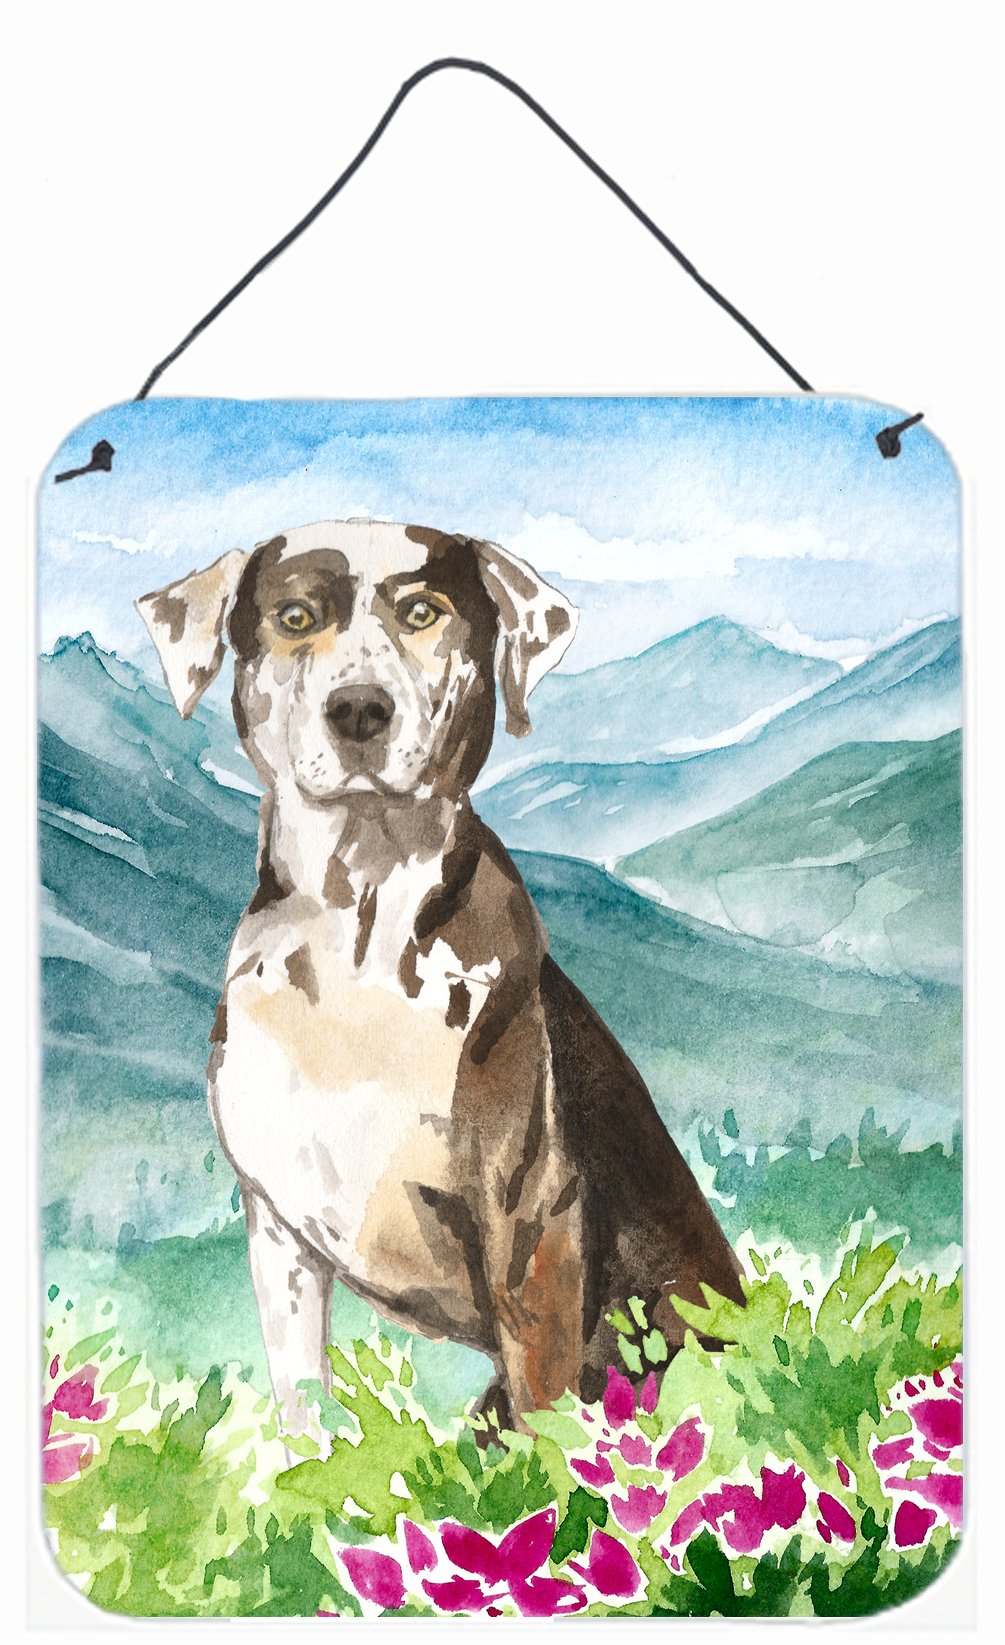 Mountain Flowers Catahoula Leopard Dog Wall or Door Hanging Prints CK2540DS1216 by Caroline's Treasures